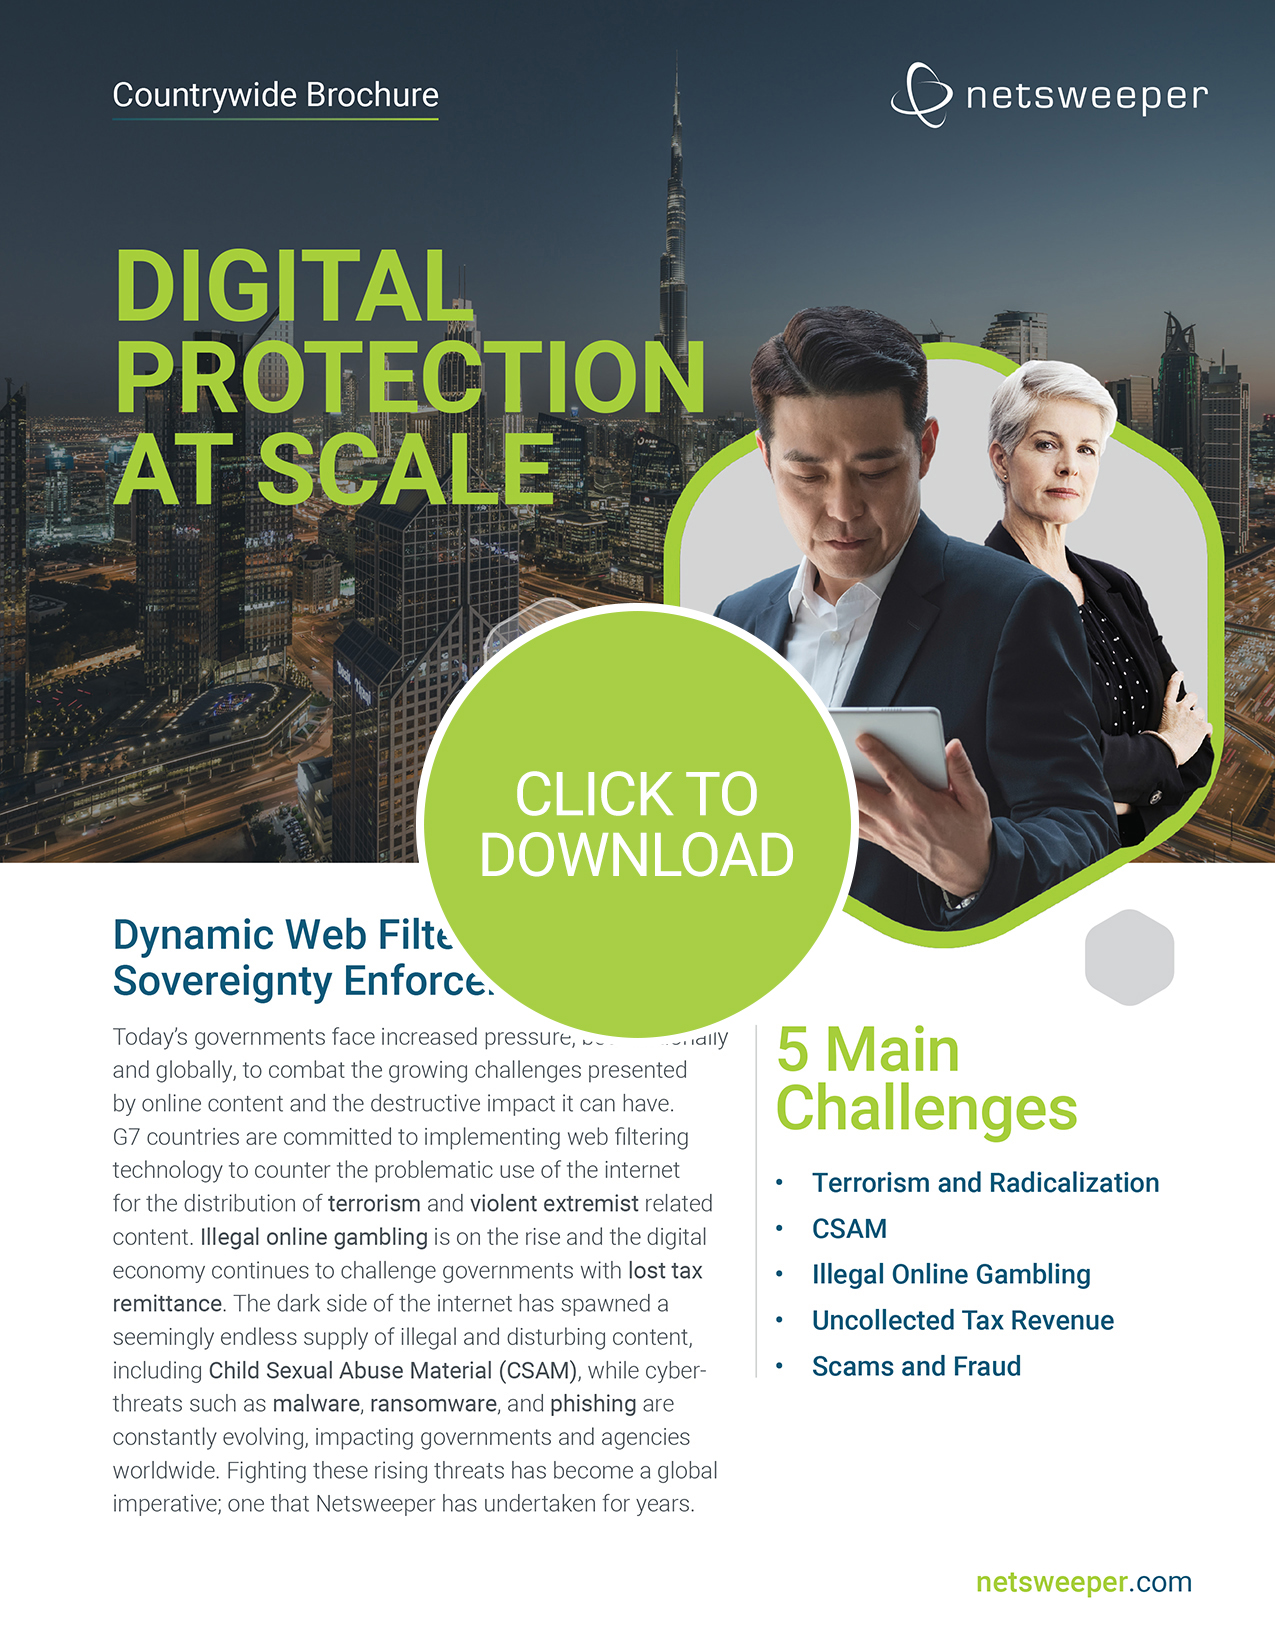 Brochure: Digital Protection at Scale